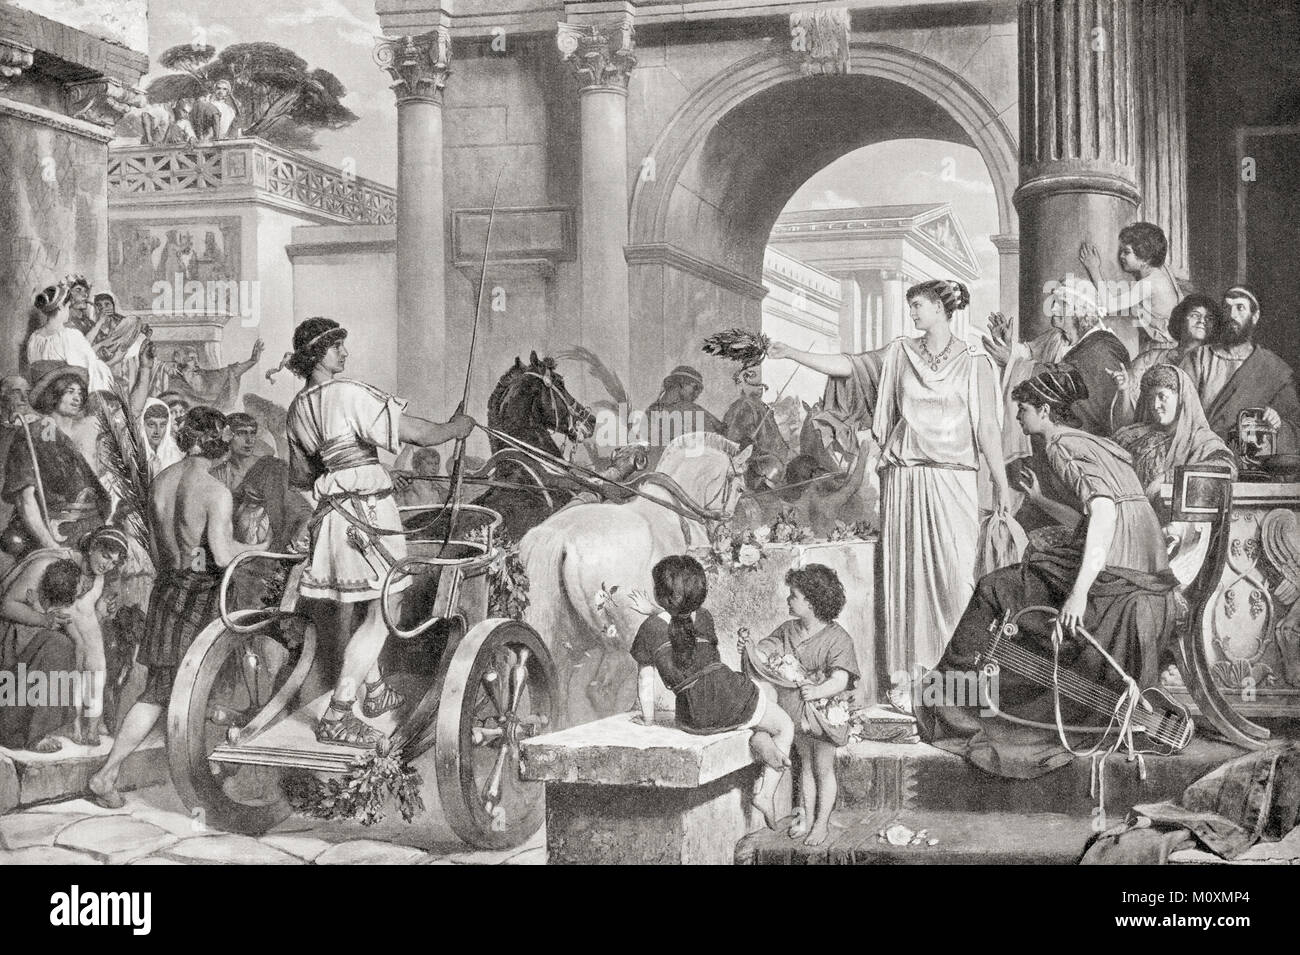 A victorious charioteer in ancient Rome accepting a laurel crown from a lady.  From Hutchinson's History of the Nations, published 1915. Stock Photo